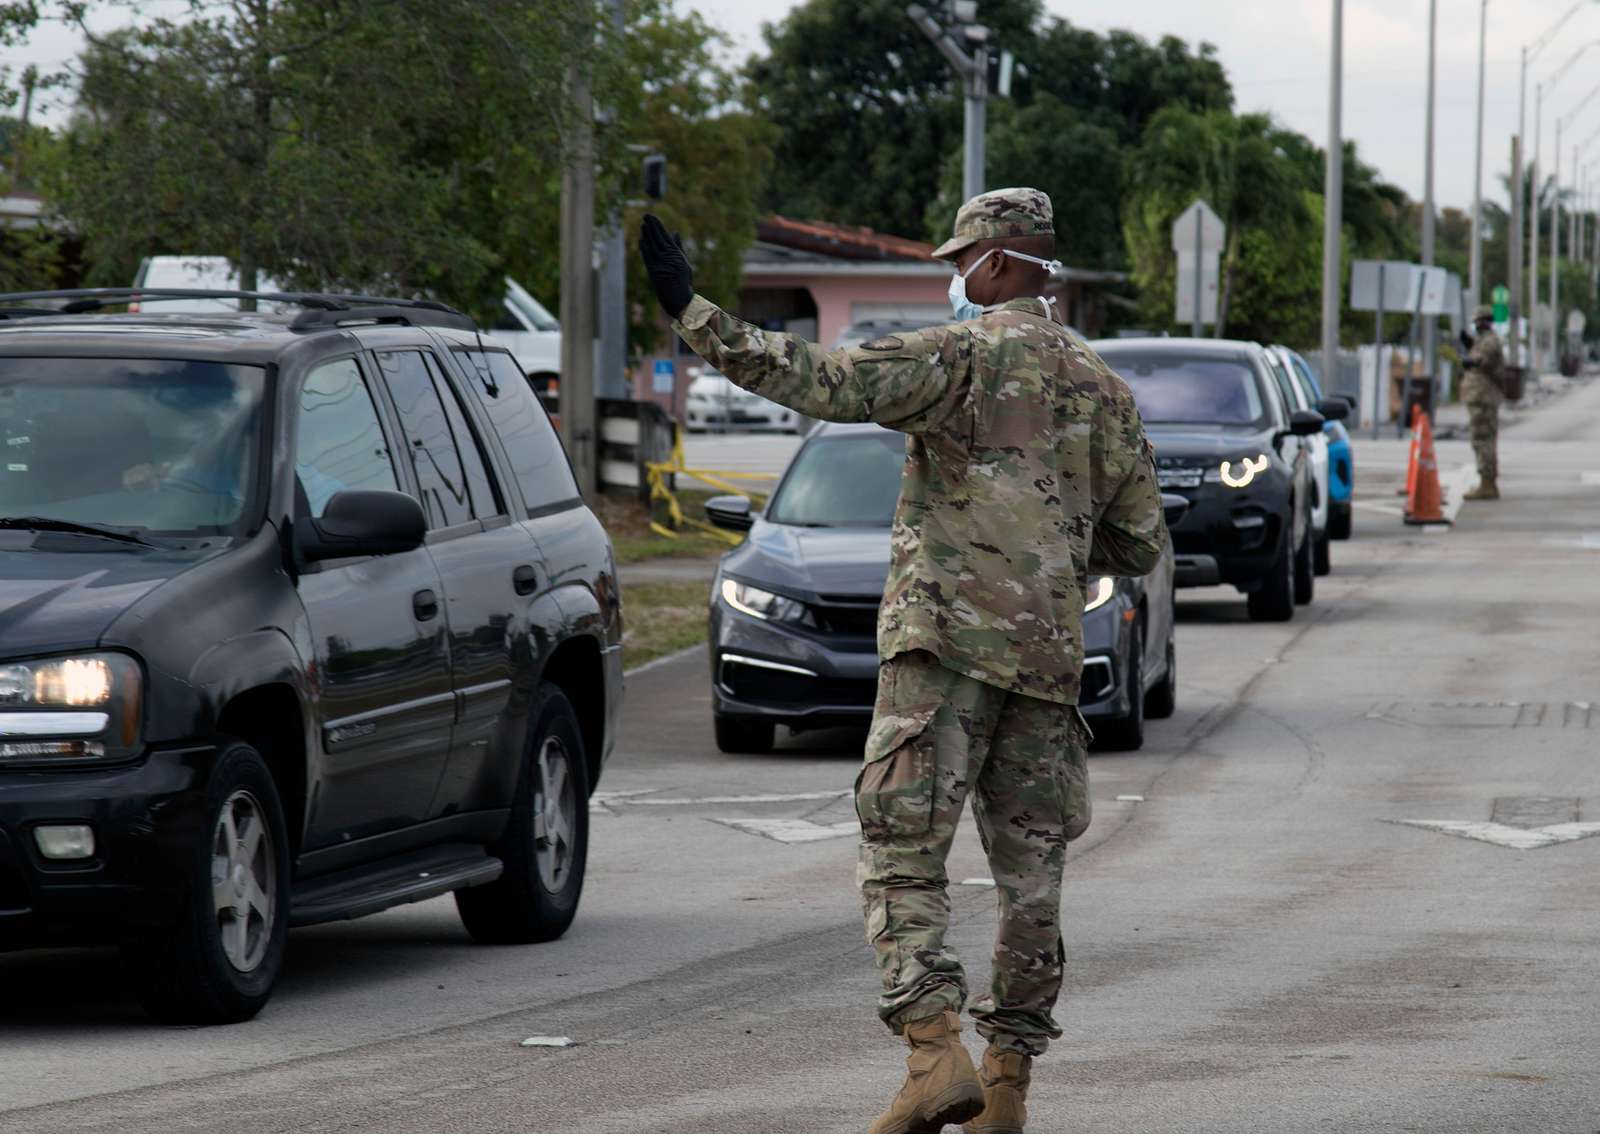 A Florida National Guard Soldiers Direct A Community B769f5 1600 